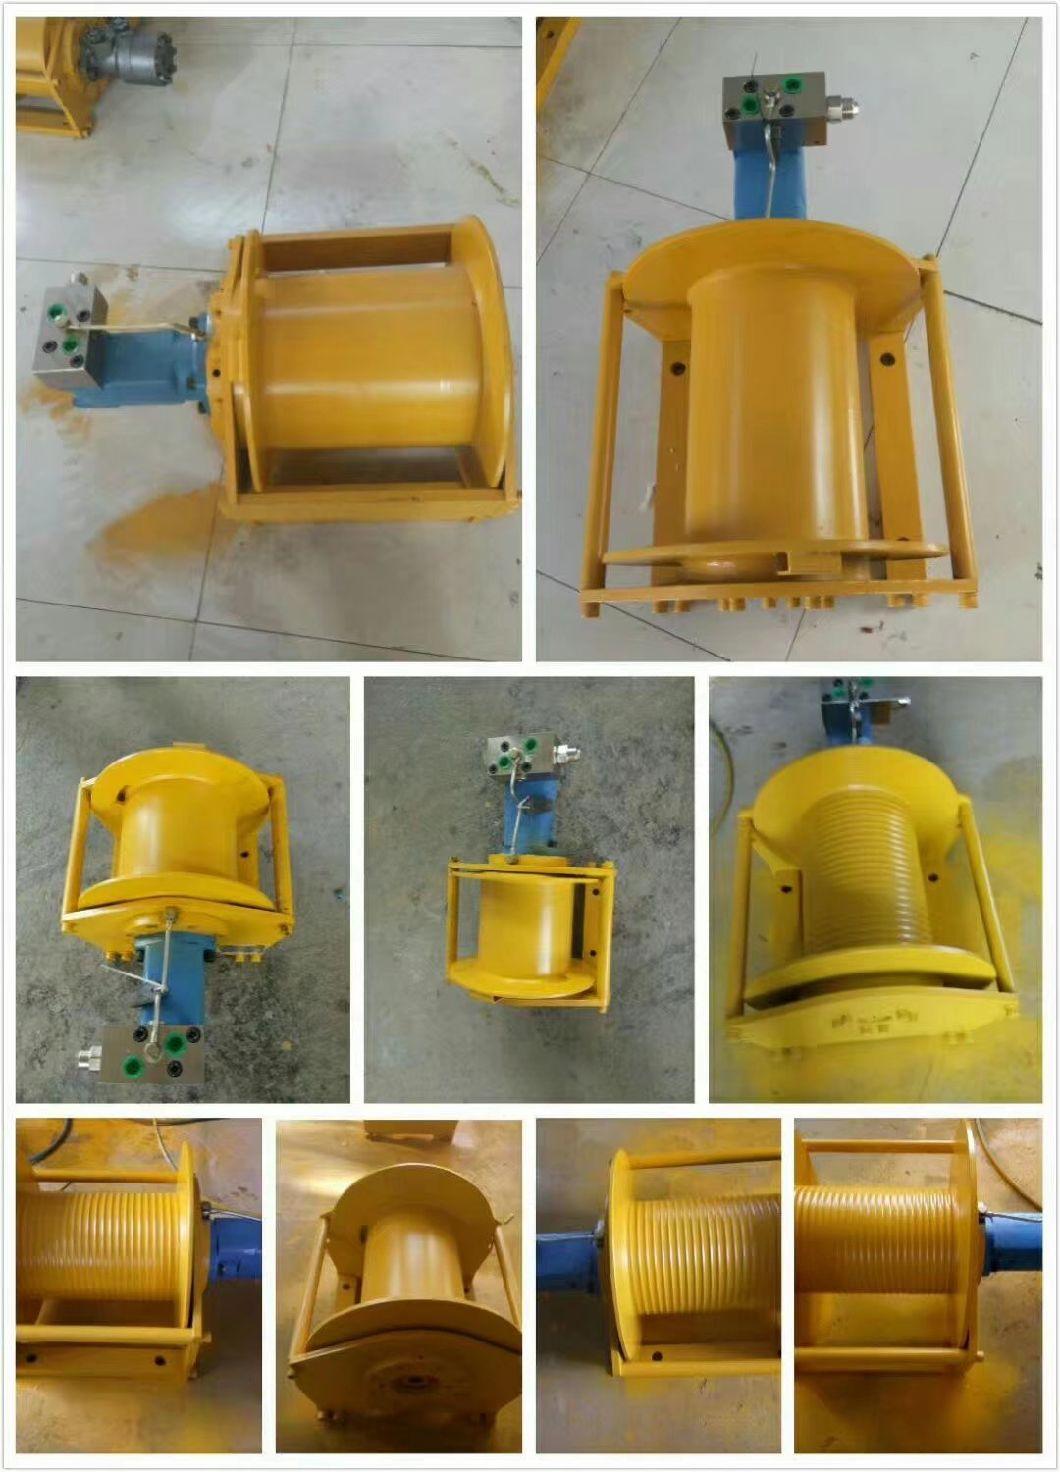 Single Rope 5ton 10 Ton Hydraulic Winch Used for Truck/Crane